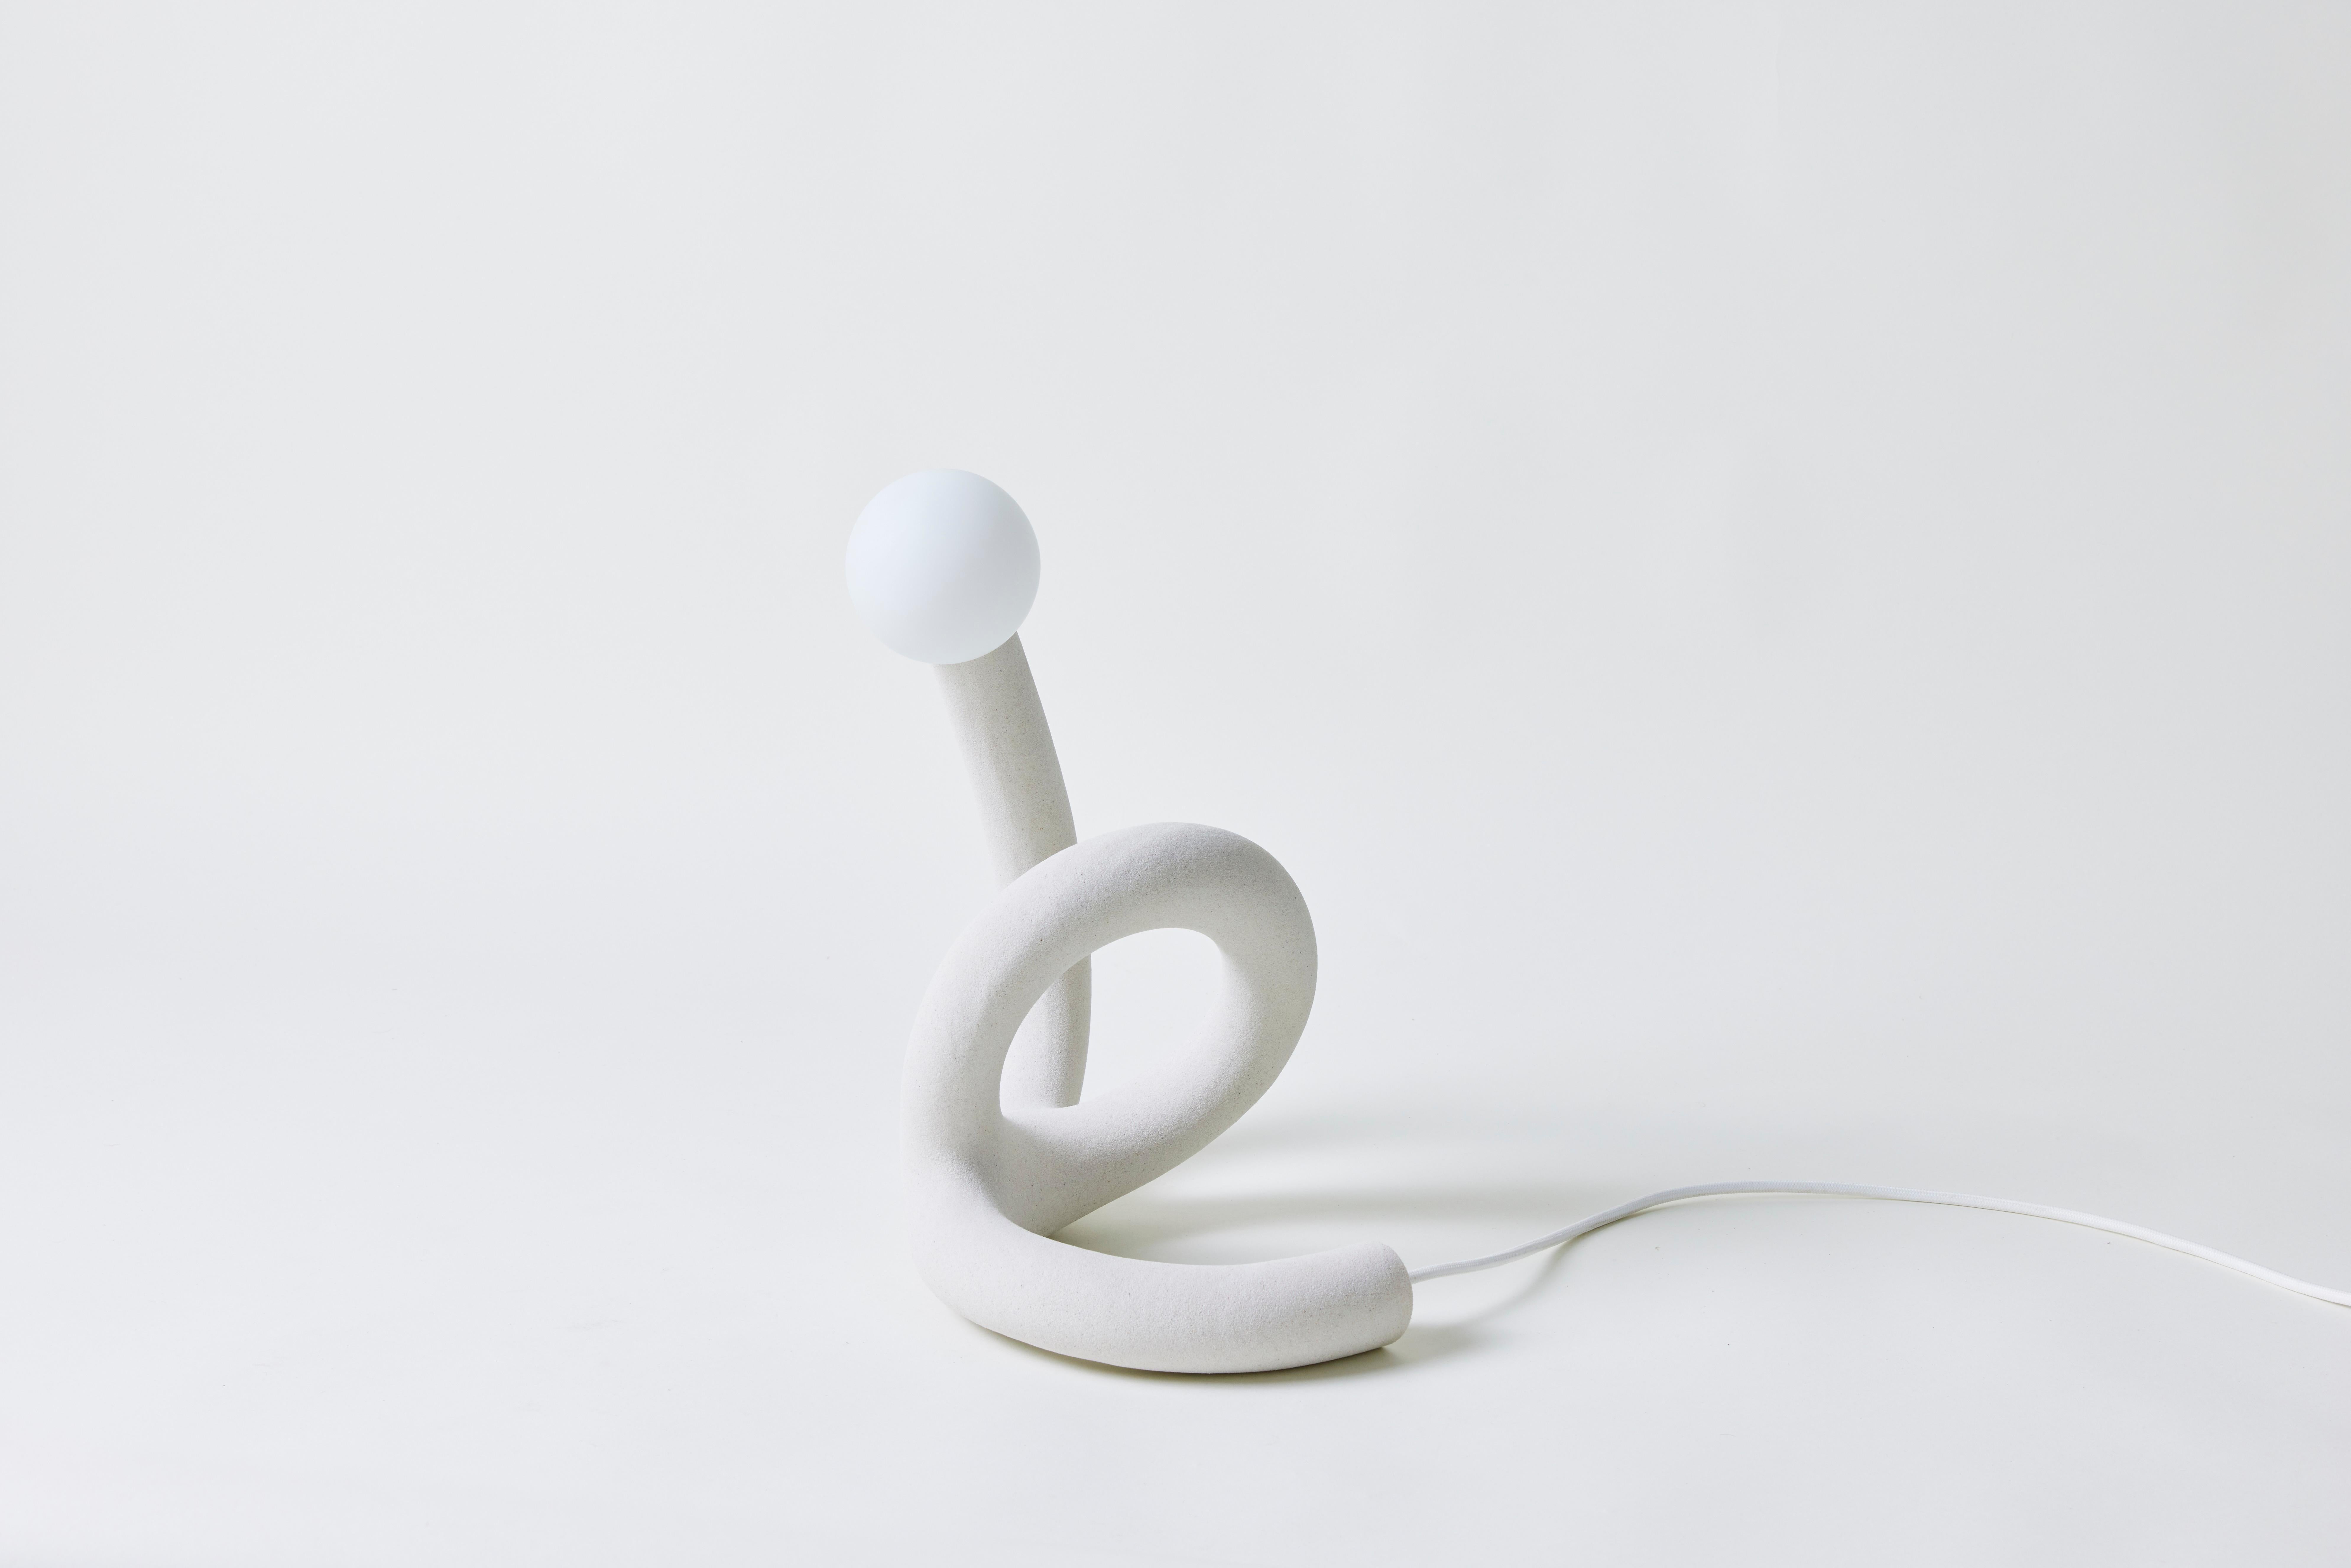 Basic Knot Variations 5 Desk Light by Hot Wire Extensions
Dimensions: D 31 x W 28 x H 38 cm 
Materials: Waste nylon powder, natural white marble sand, copper pipe, hand-blown glass bulbs, natural cotton electrical cord.
3 kg

Different sands and